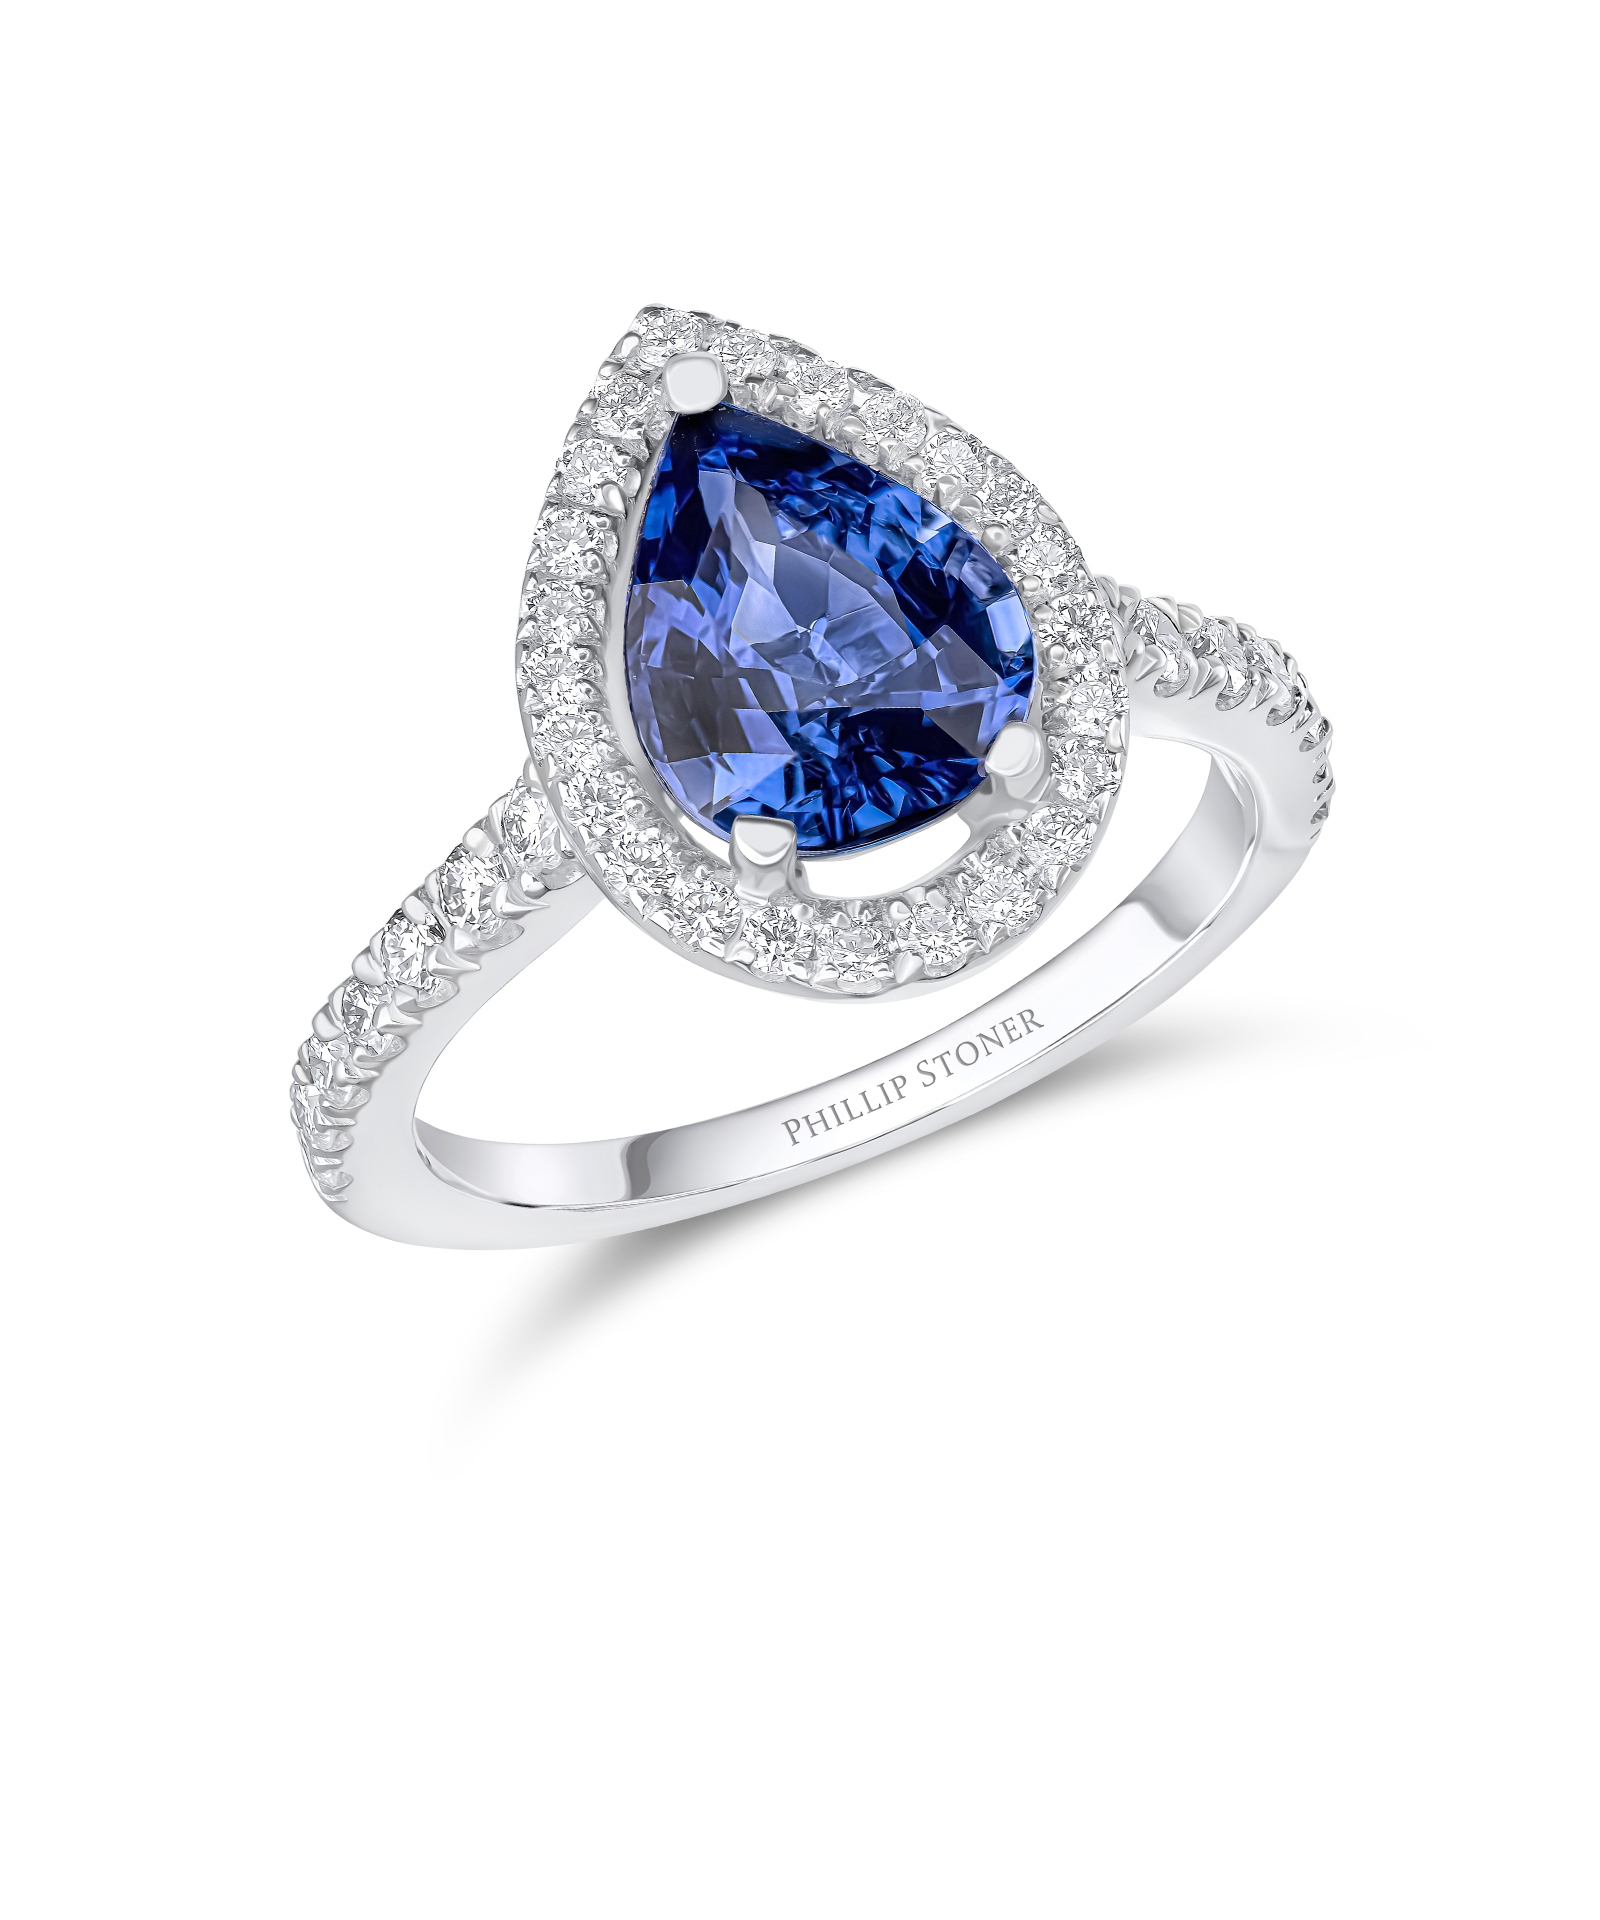 2.70ct Pear Sapphire and Diamond Thea Cocktail Ring - Phillip Stoner The Jeweller